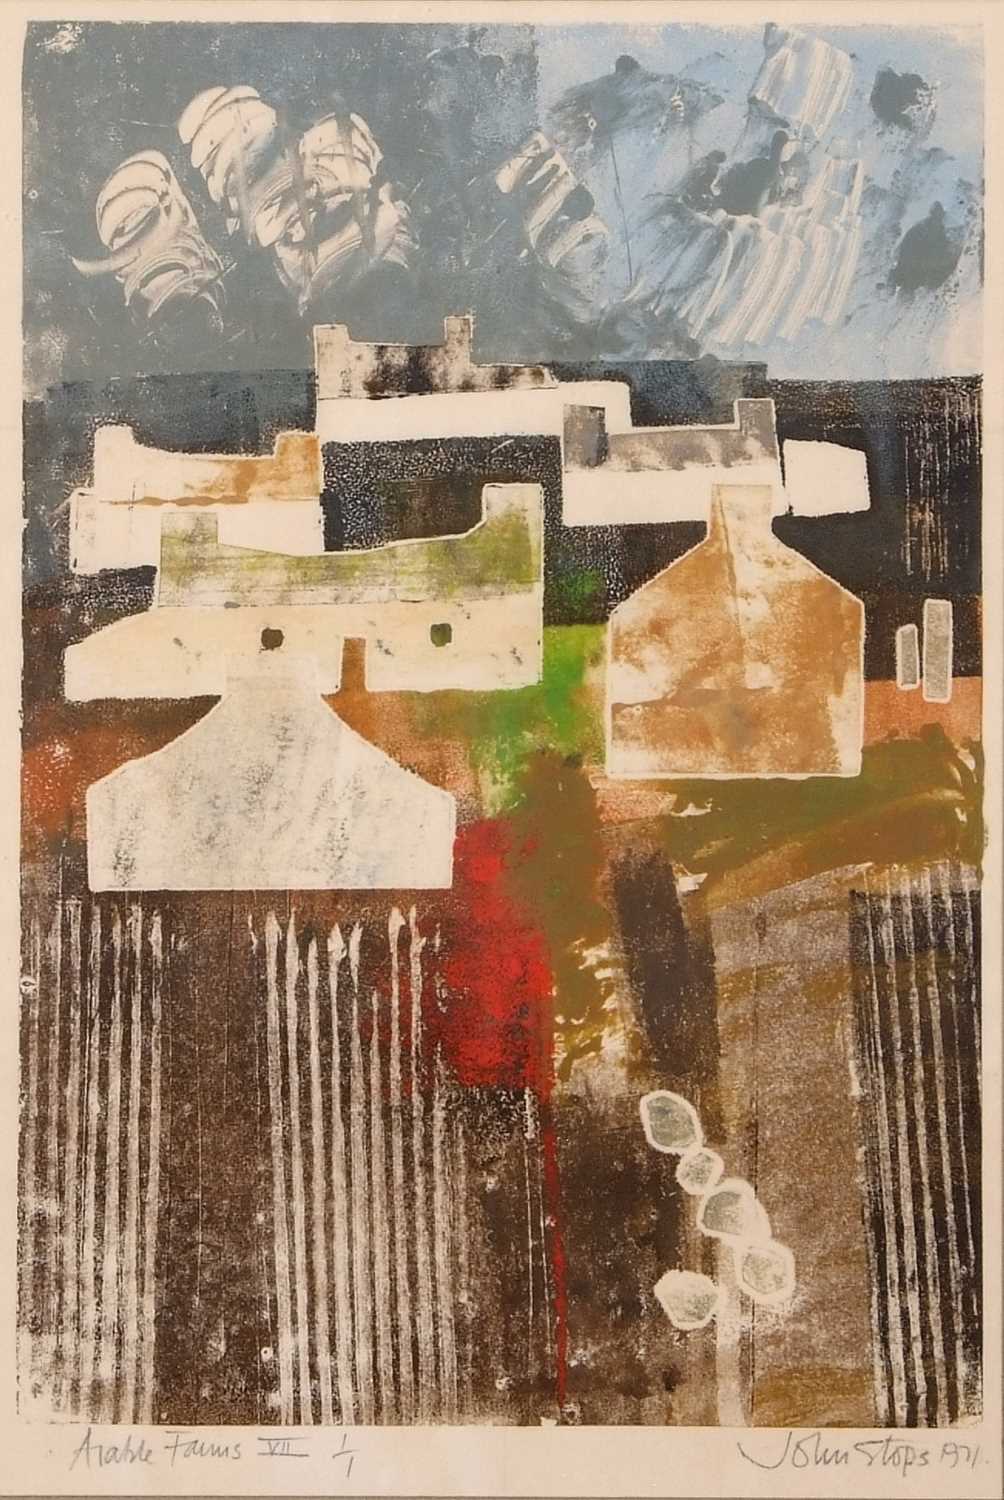 John Stops (British,1925-2002), 'Arable Farms VII', screenprint, numbered 1/1, signed and dated 1971 - Image 2 of 2